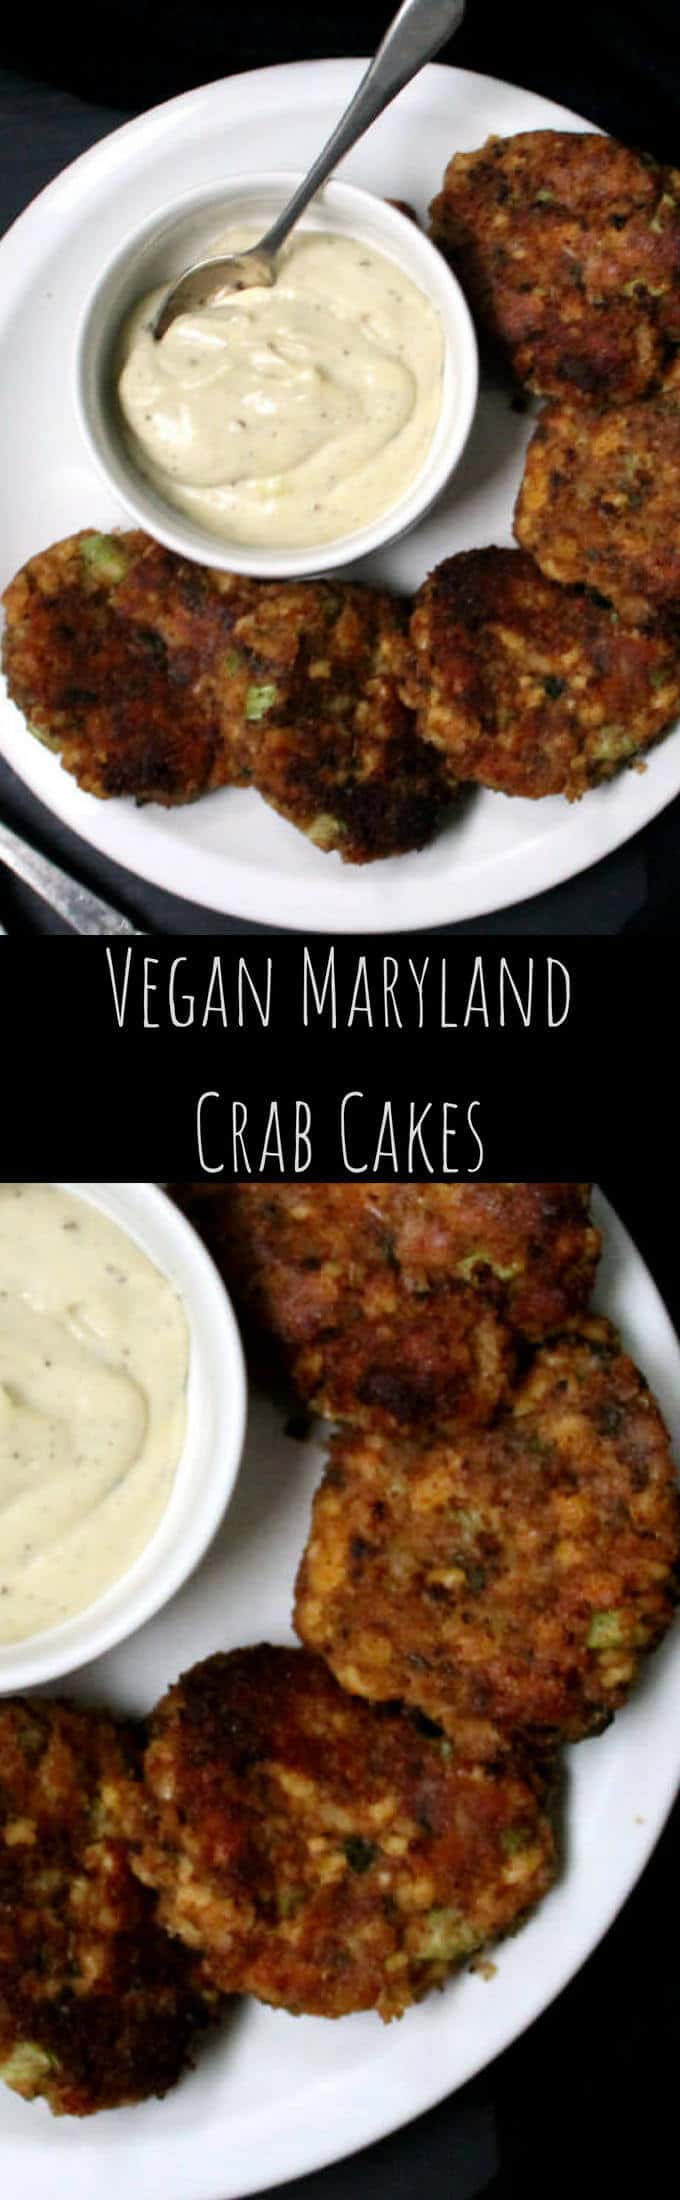 Images of crabcakes with text inlay that says "vegan maryland crab cakes"